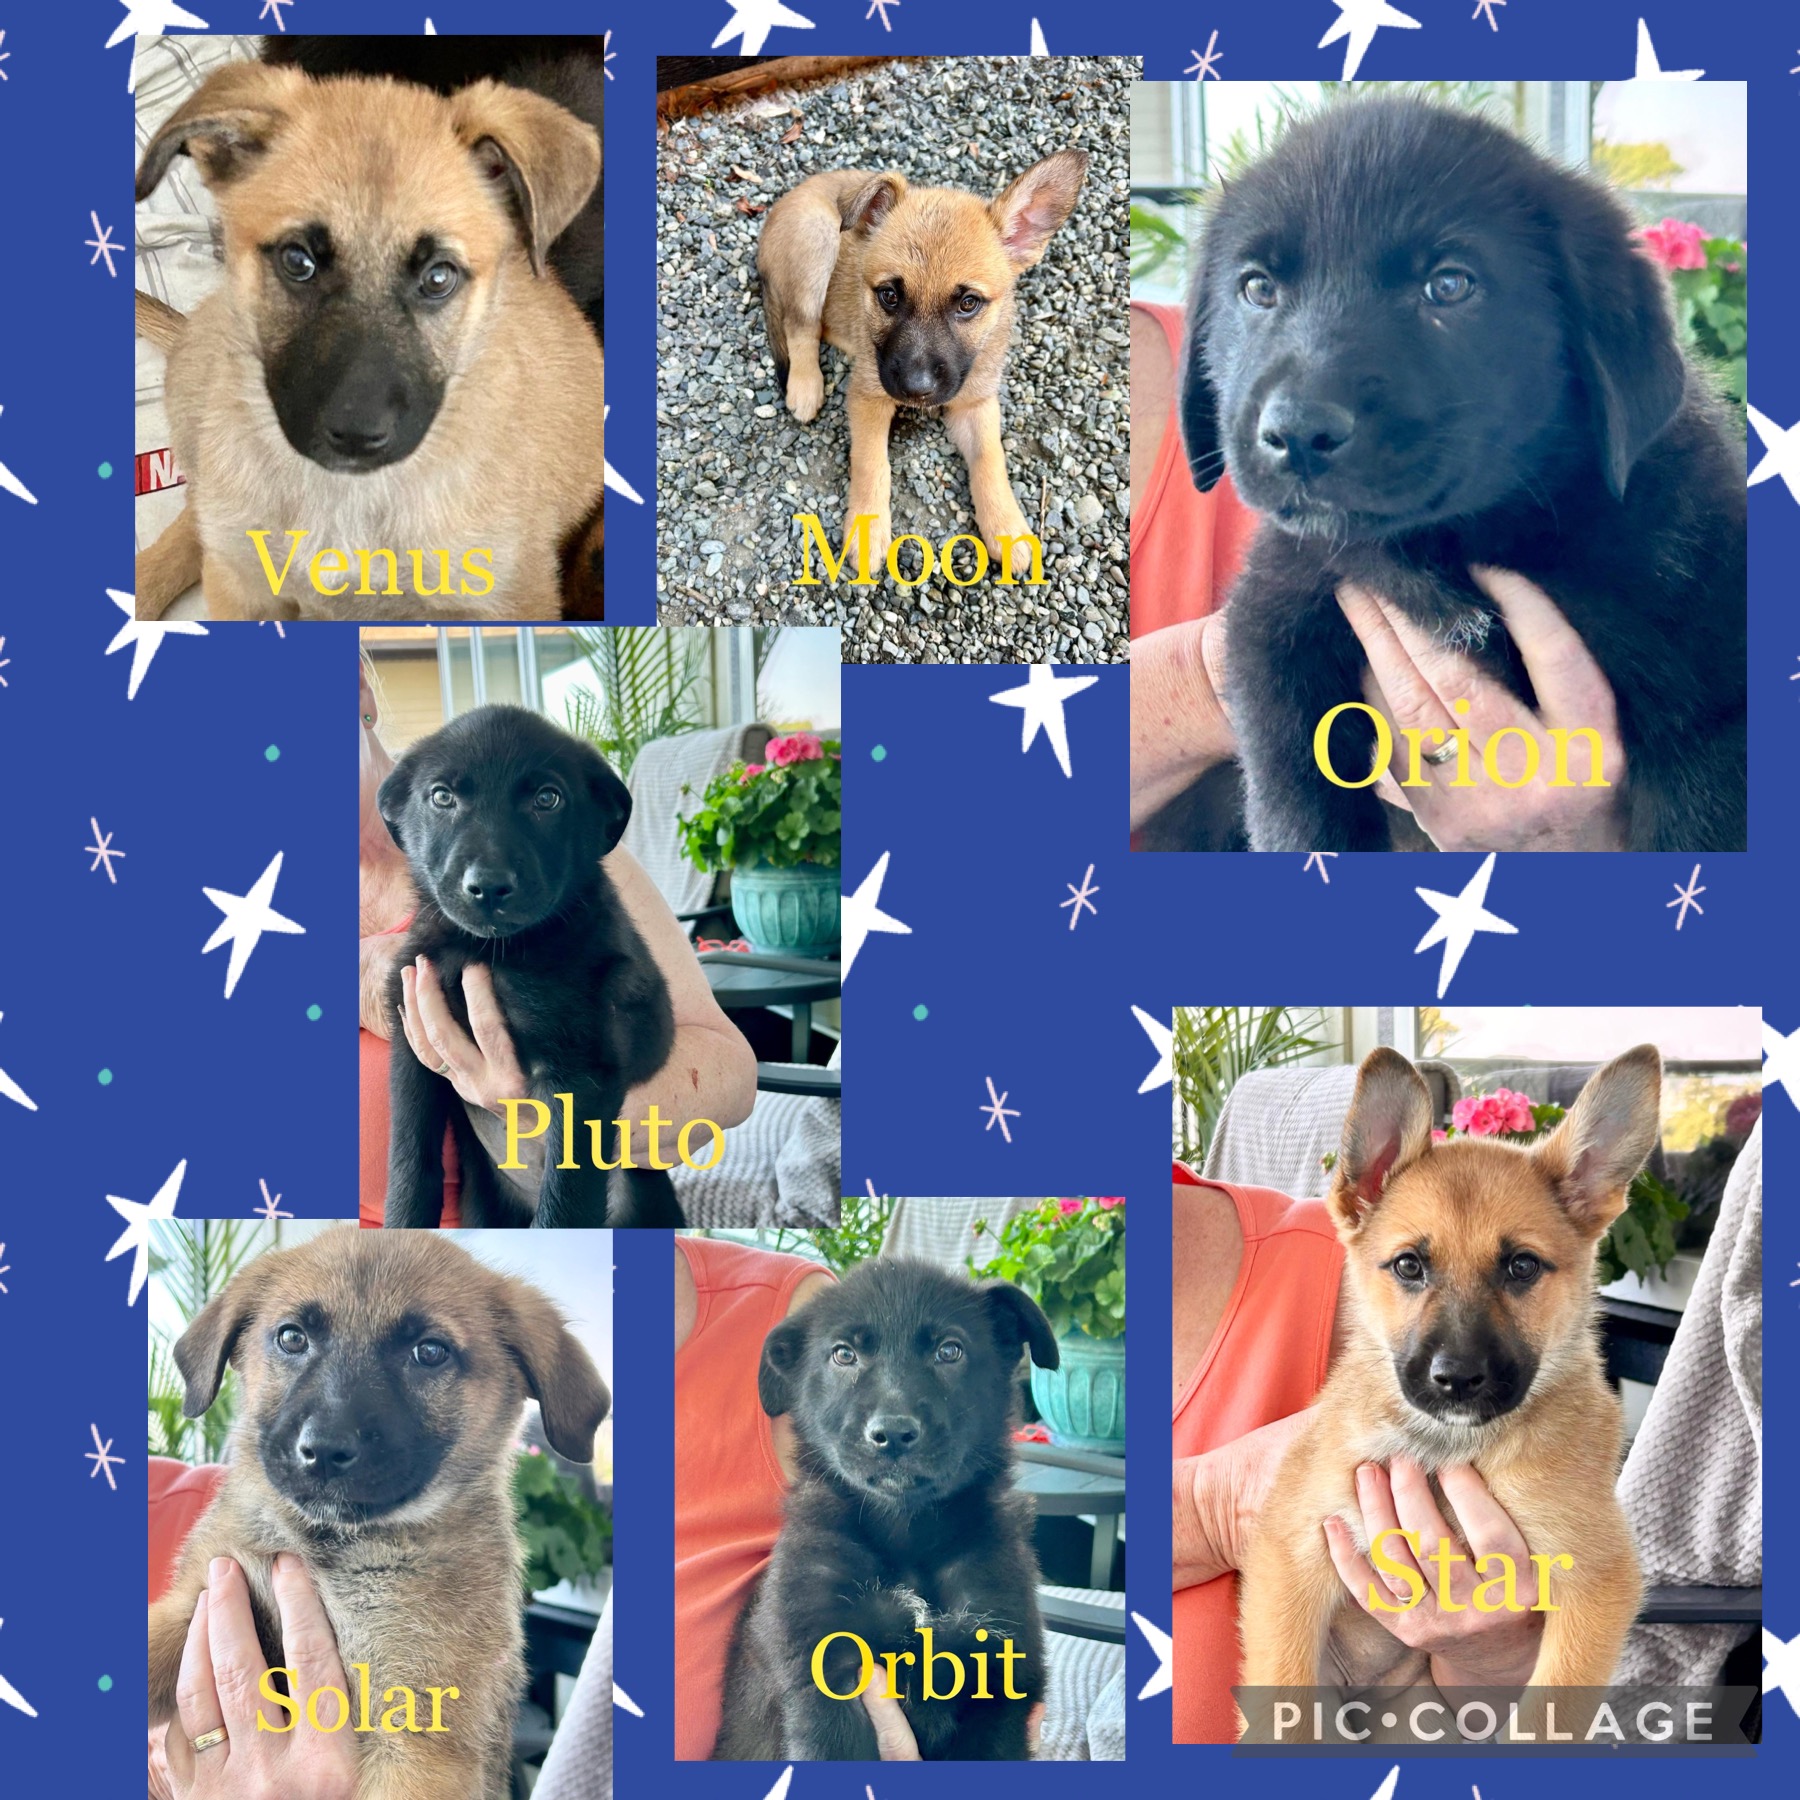 Adoptable Puppies